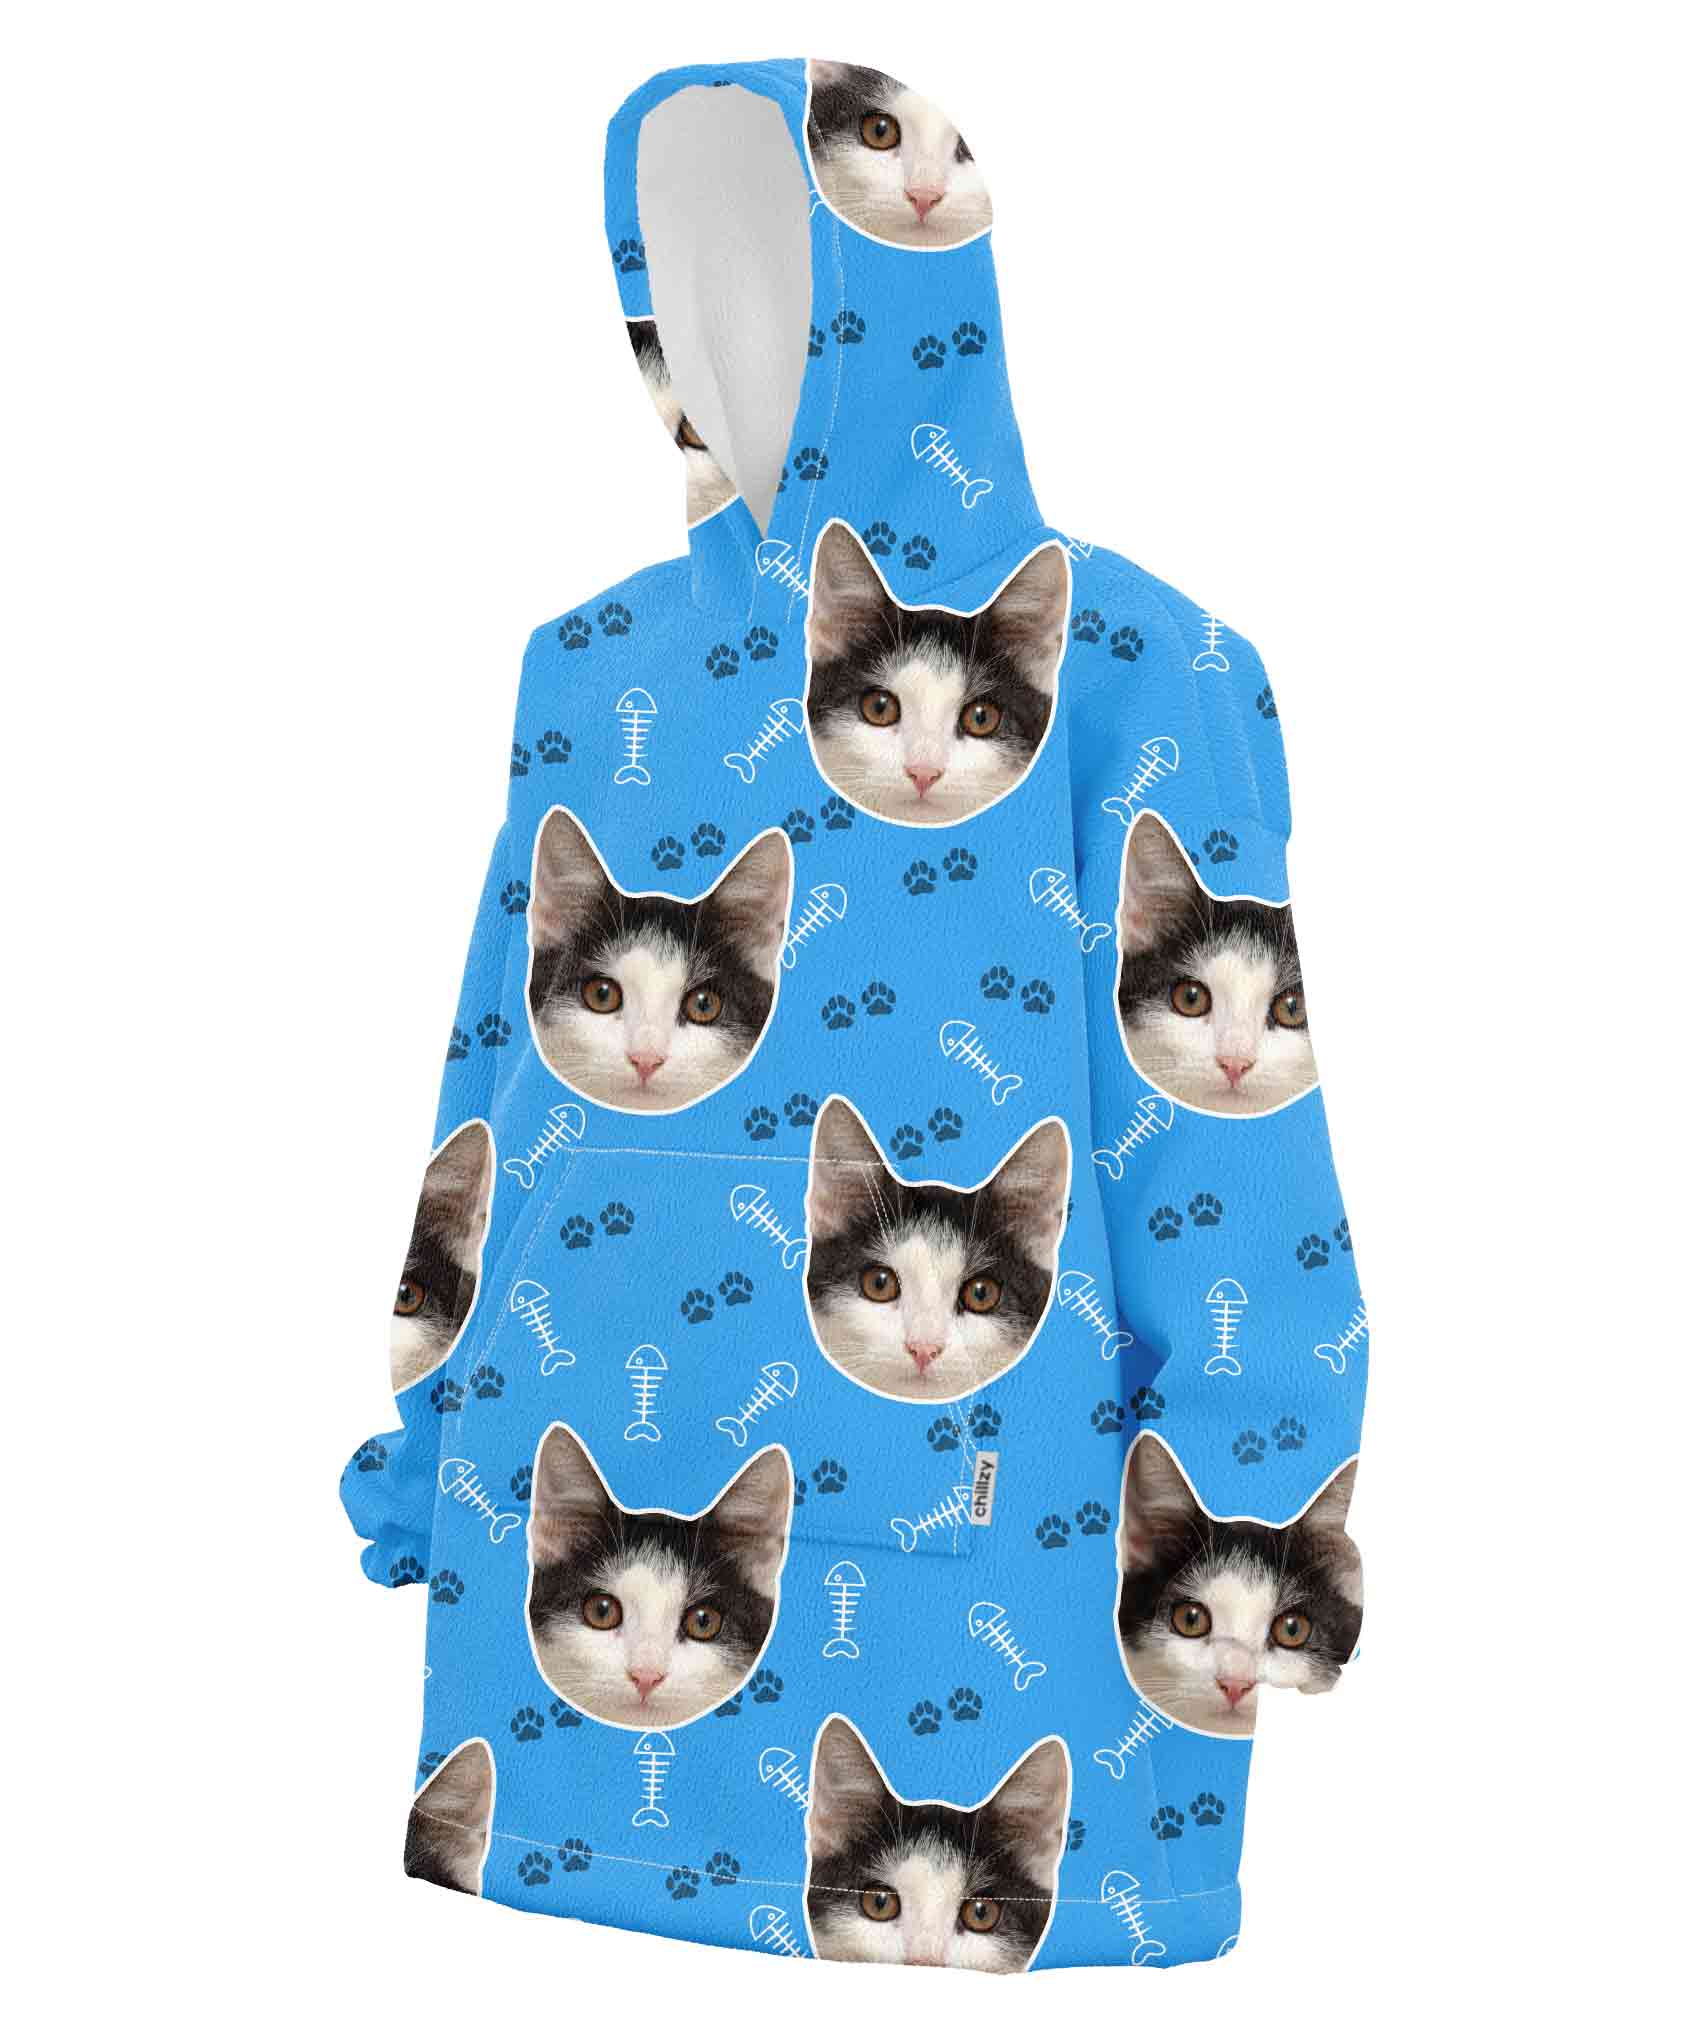 Your Cat Chillzy Hoodie Blanket